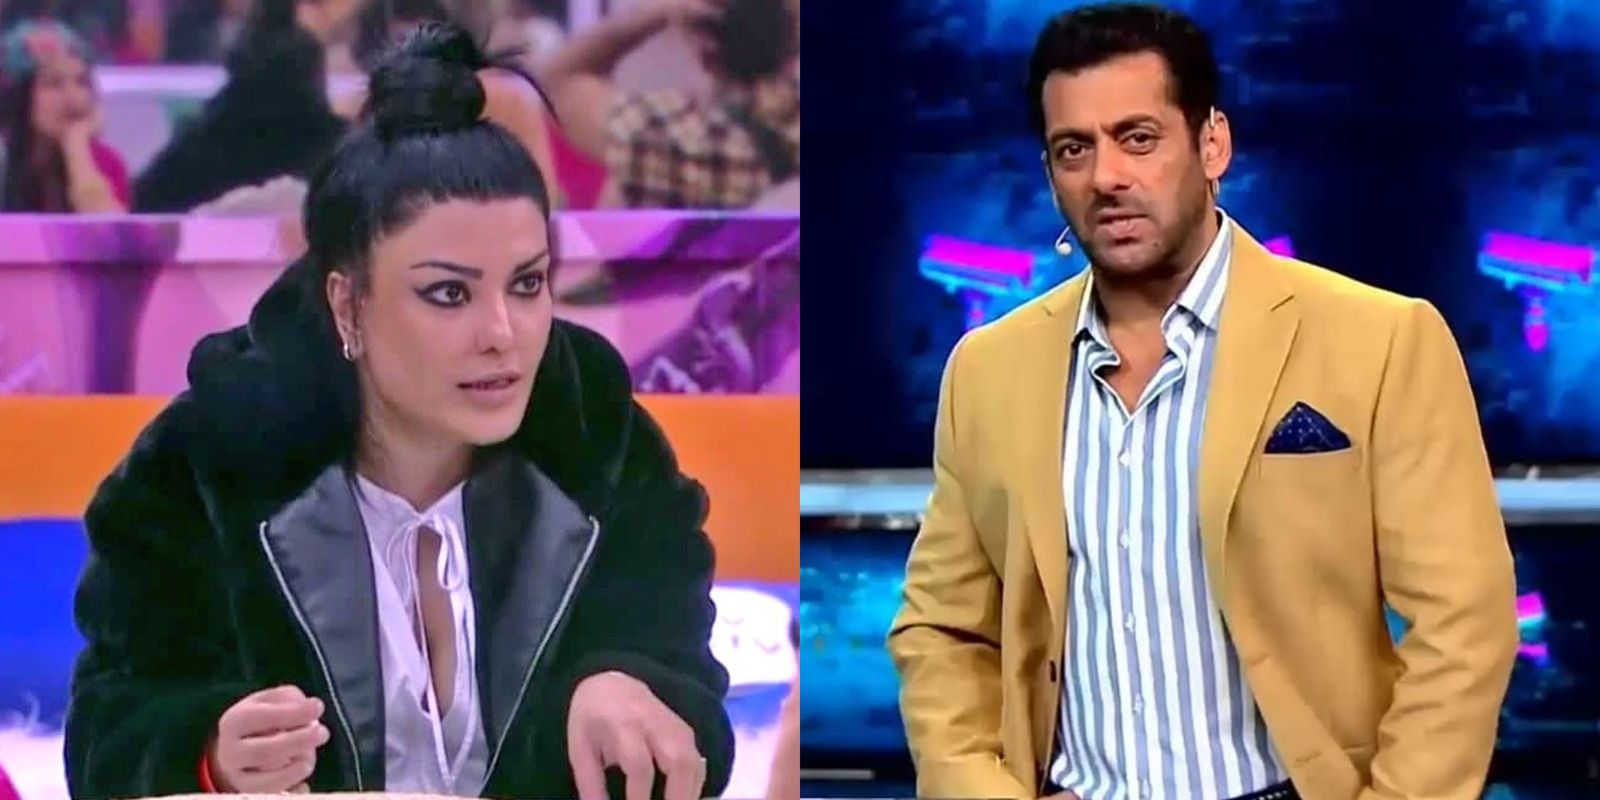 Bigg Boss 13: Koena Mitra Slams Host Salman Khan For Being Biased Says, 'People Can't Handle Strong, Independent Women'